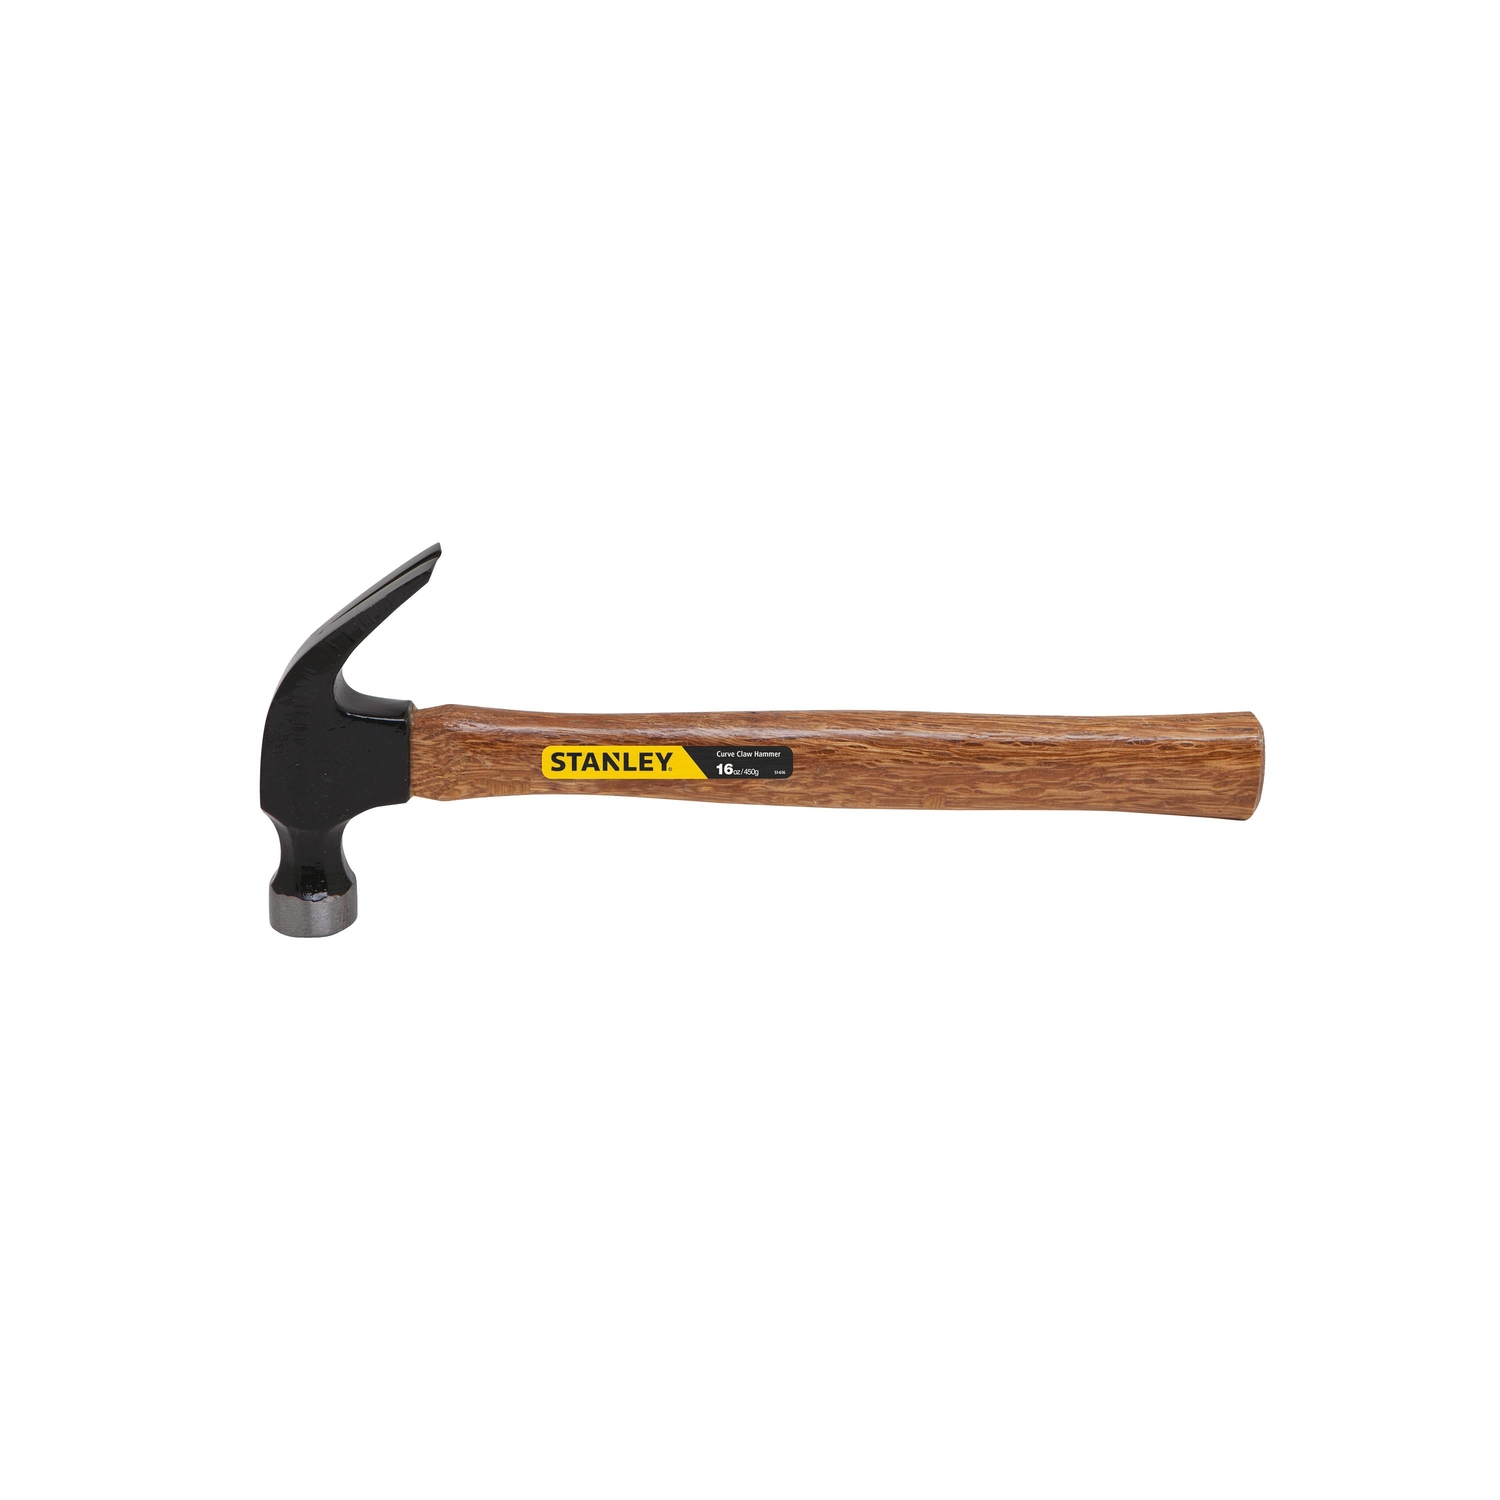 Photos - Hammer Stanley 16 oz Smooth Face Nailing Curved Claw  5.25 in. Wood Handle 